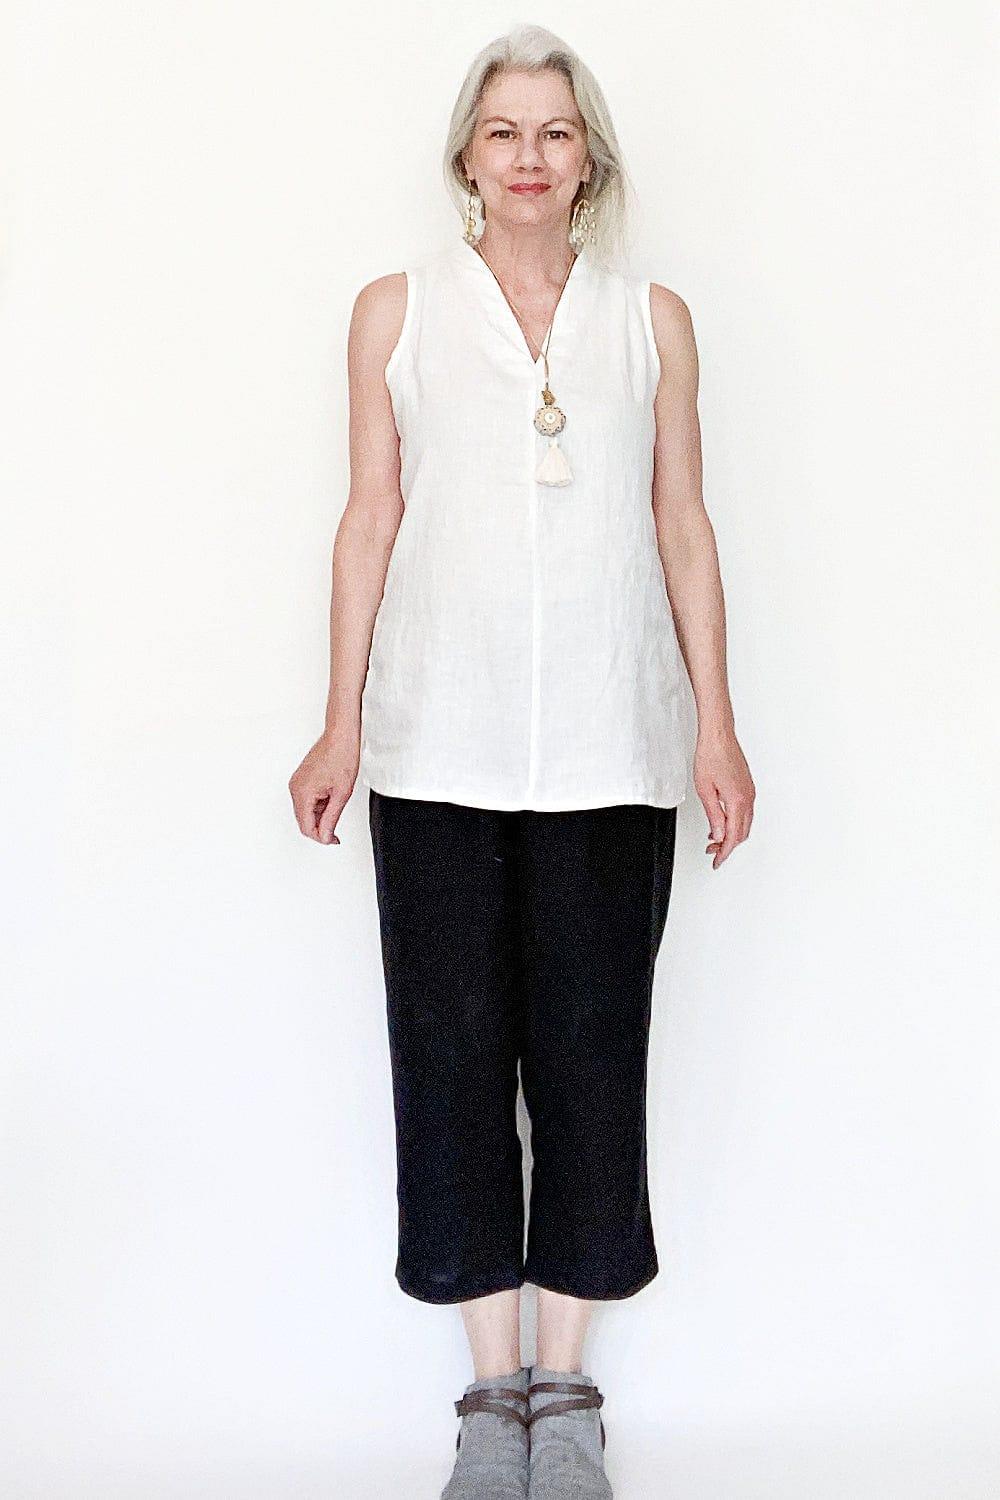 Women with long grey hair pulled back wearing a sleeveless v neck tunic and black taper legged crop pants.